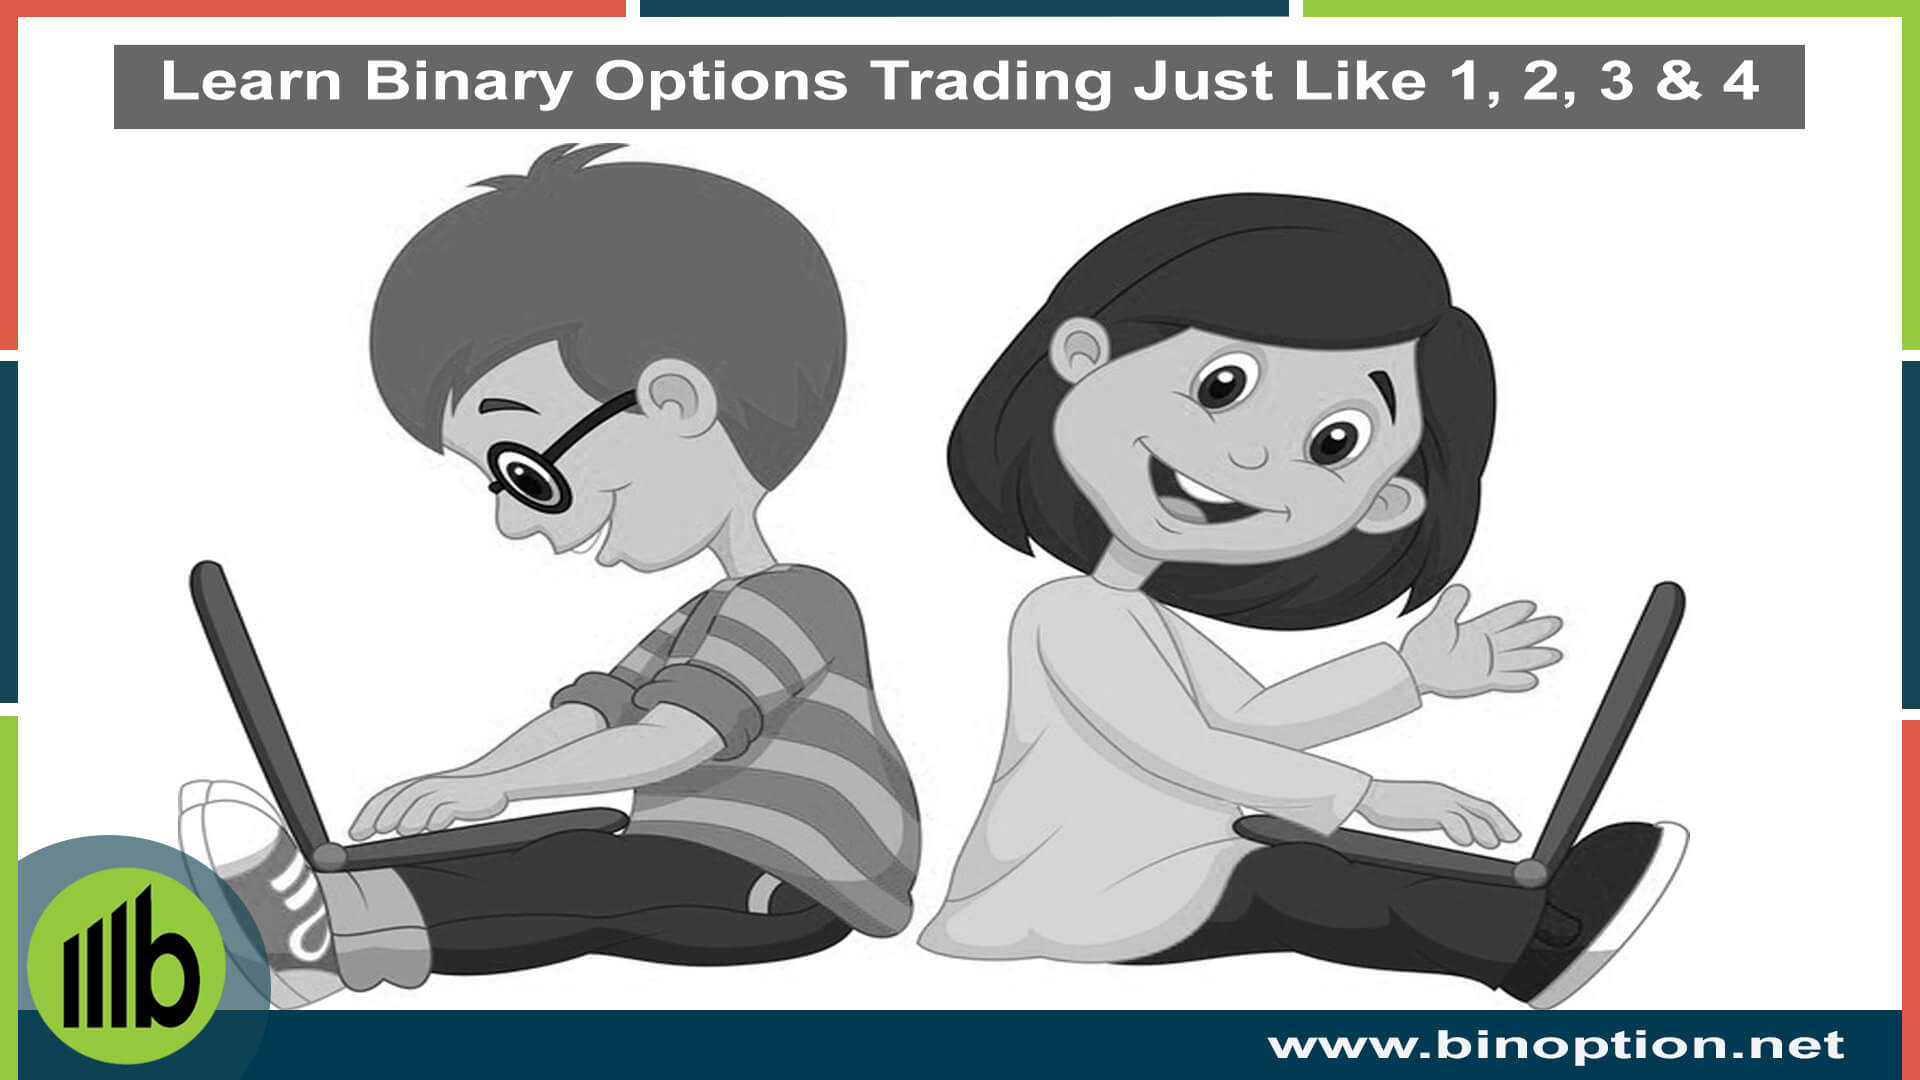 I want to learn how to trade binary options